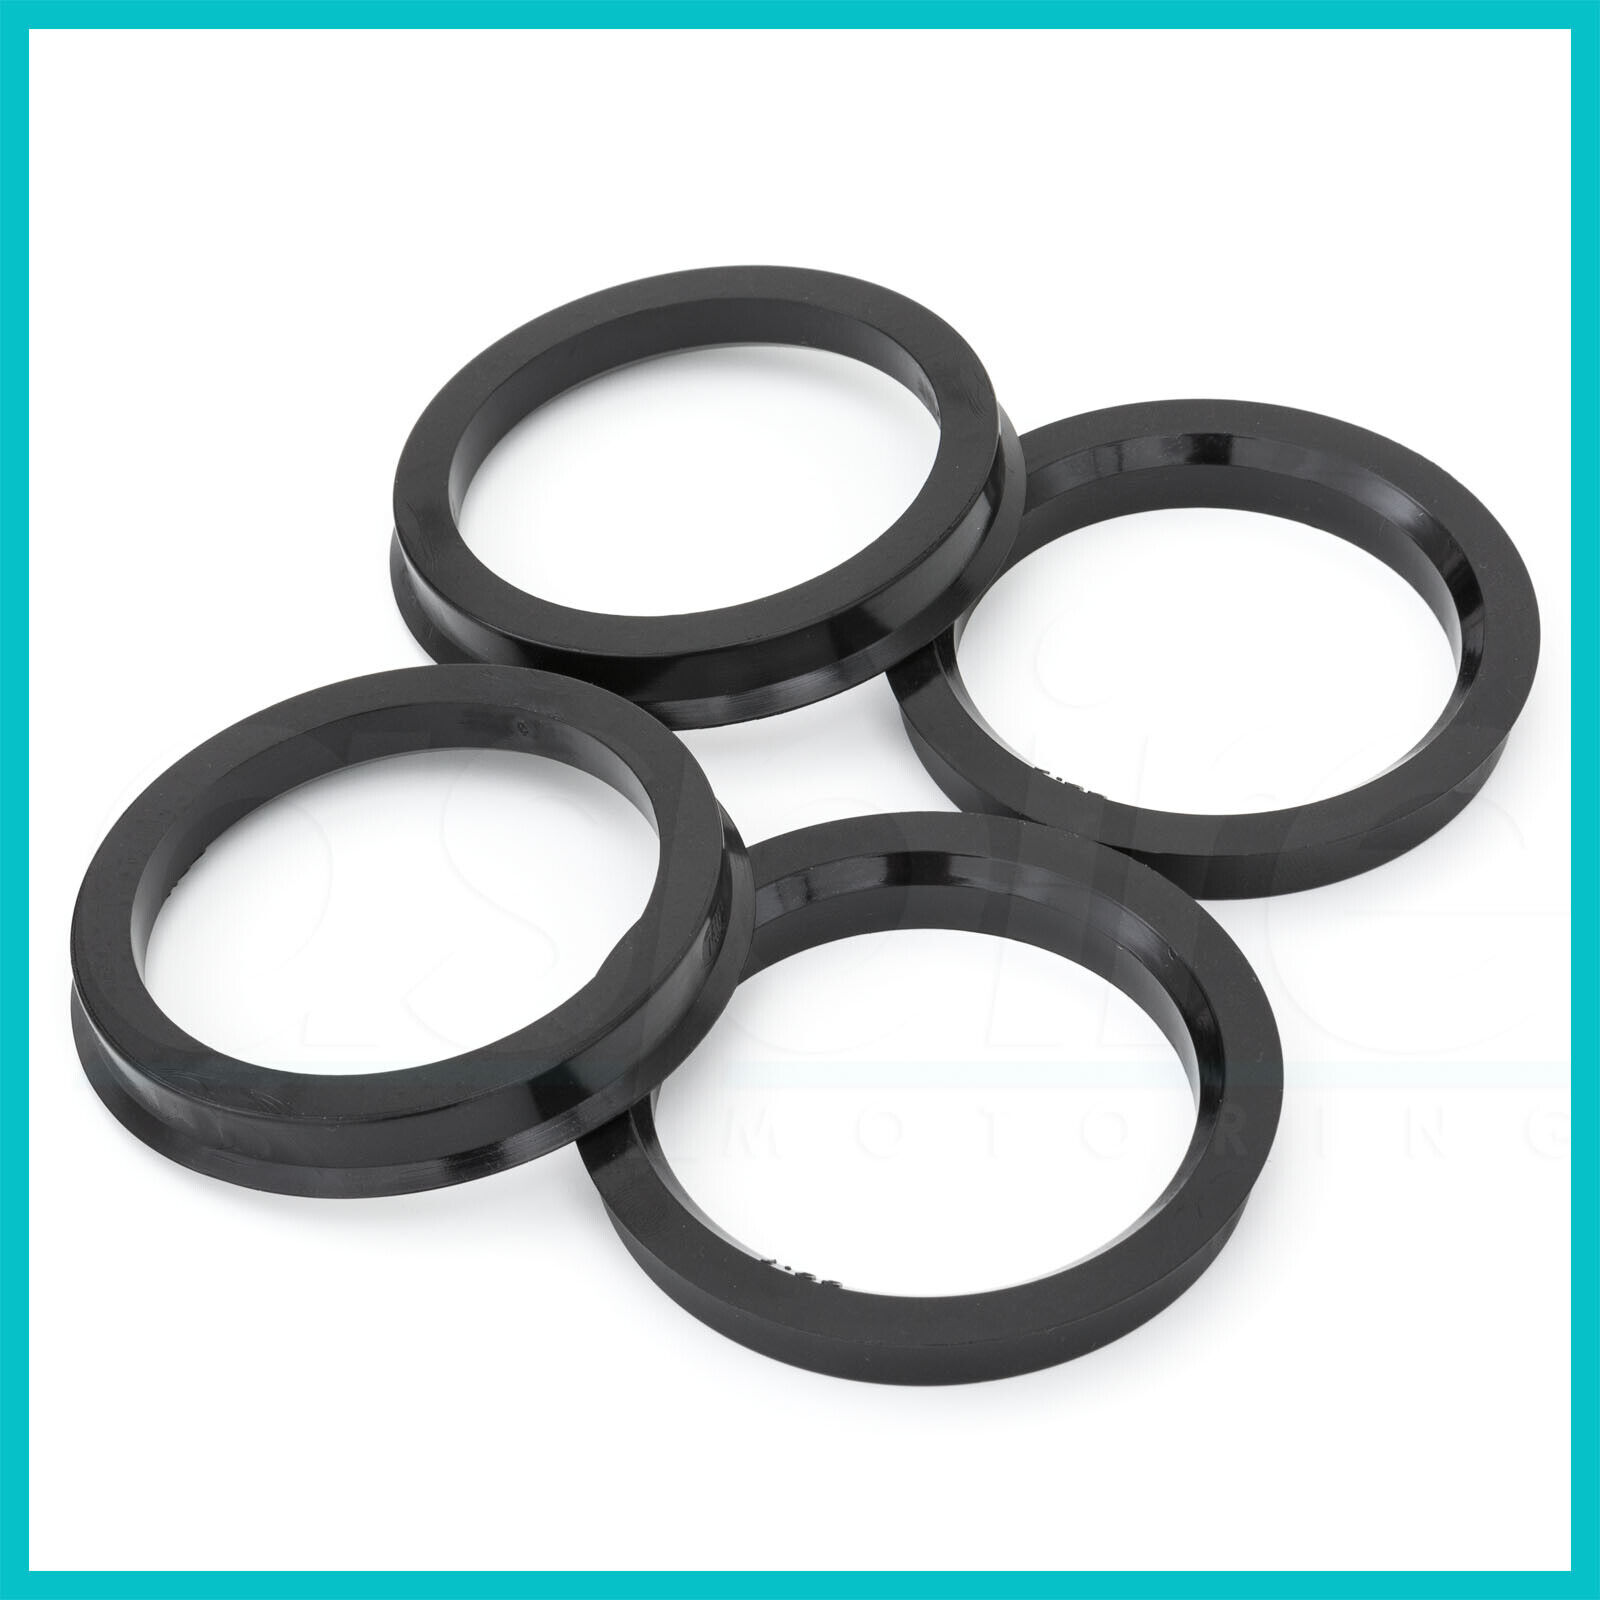 4 Hub Centric Rings 73.1mm to 56.1mm | Hubcentric Ring 73 - 56 Sale